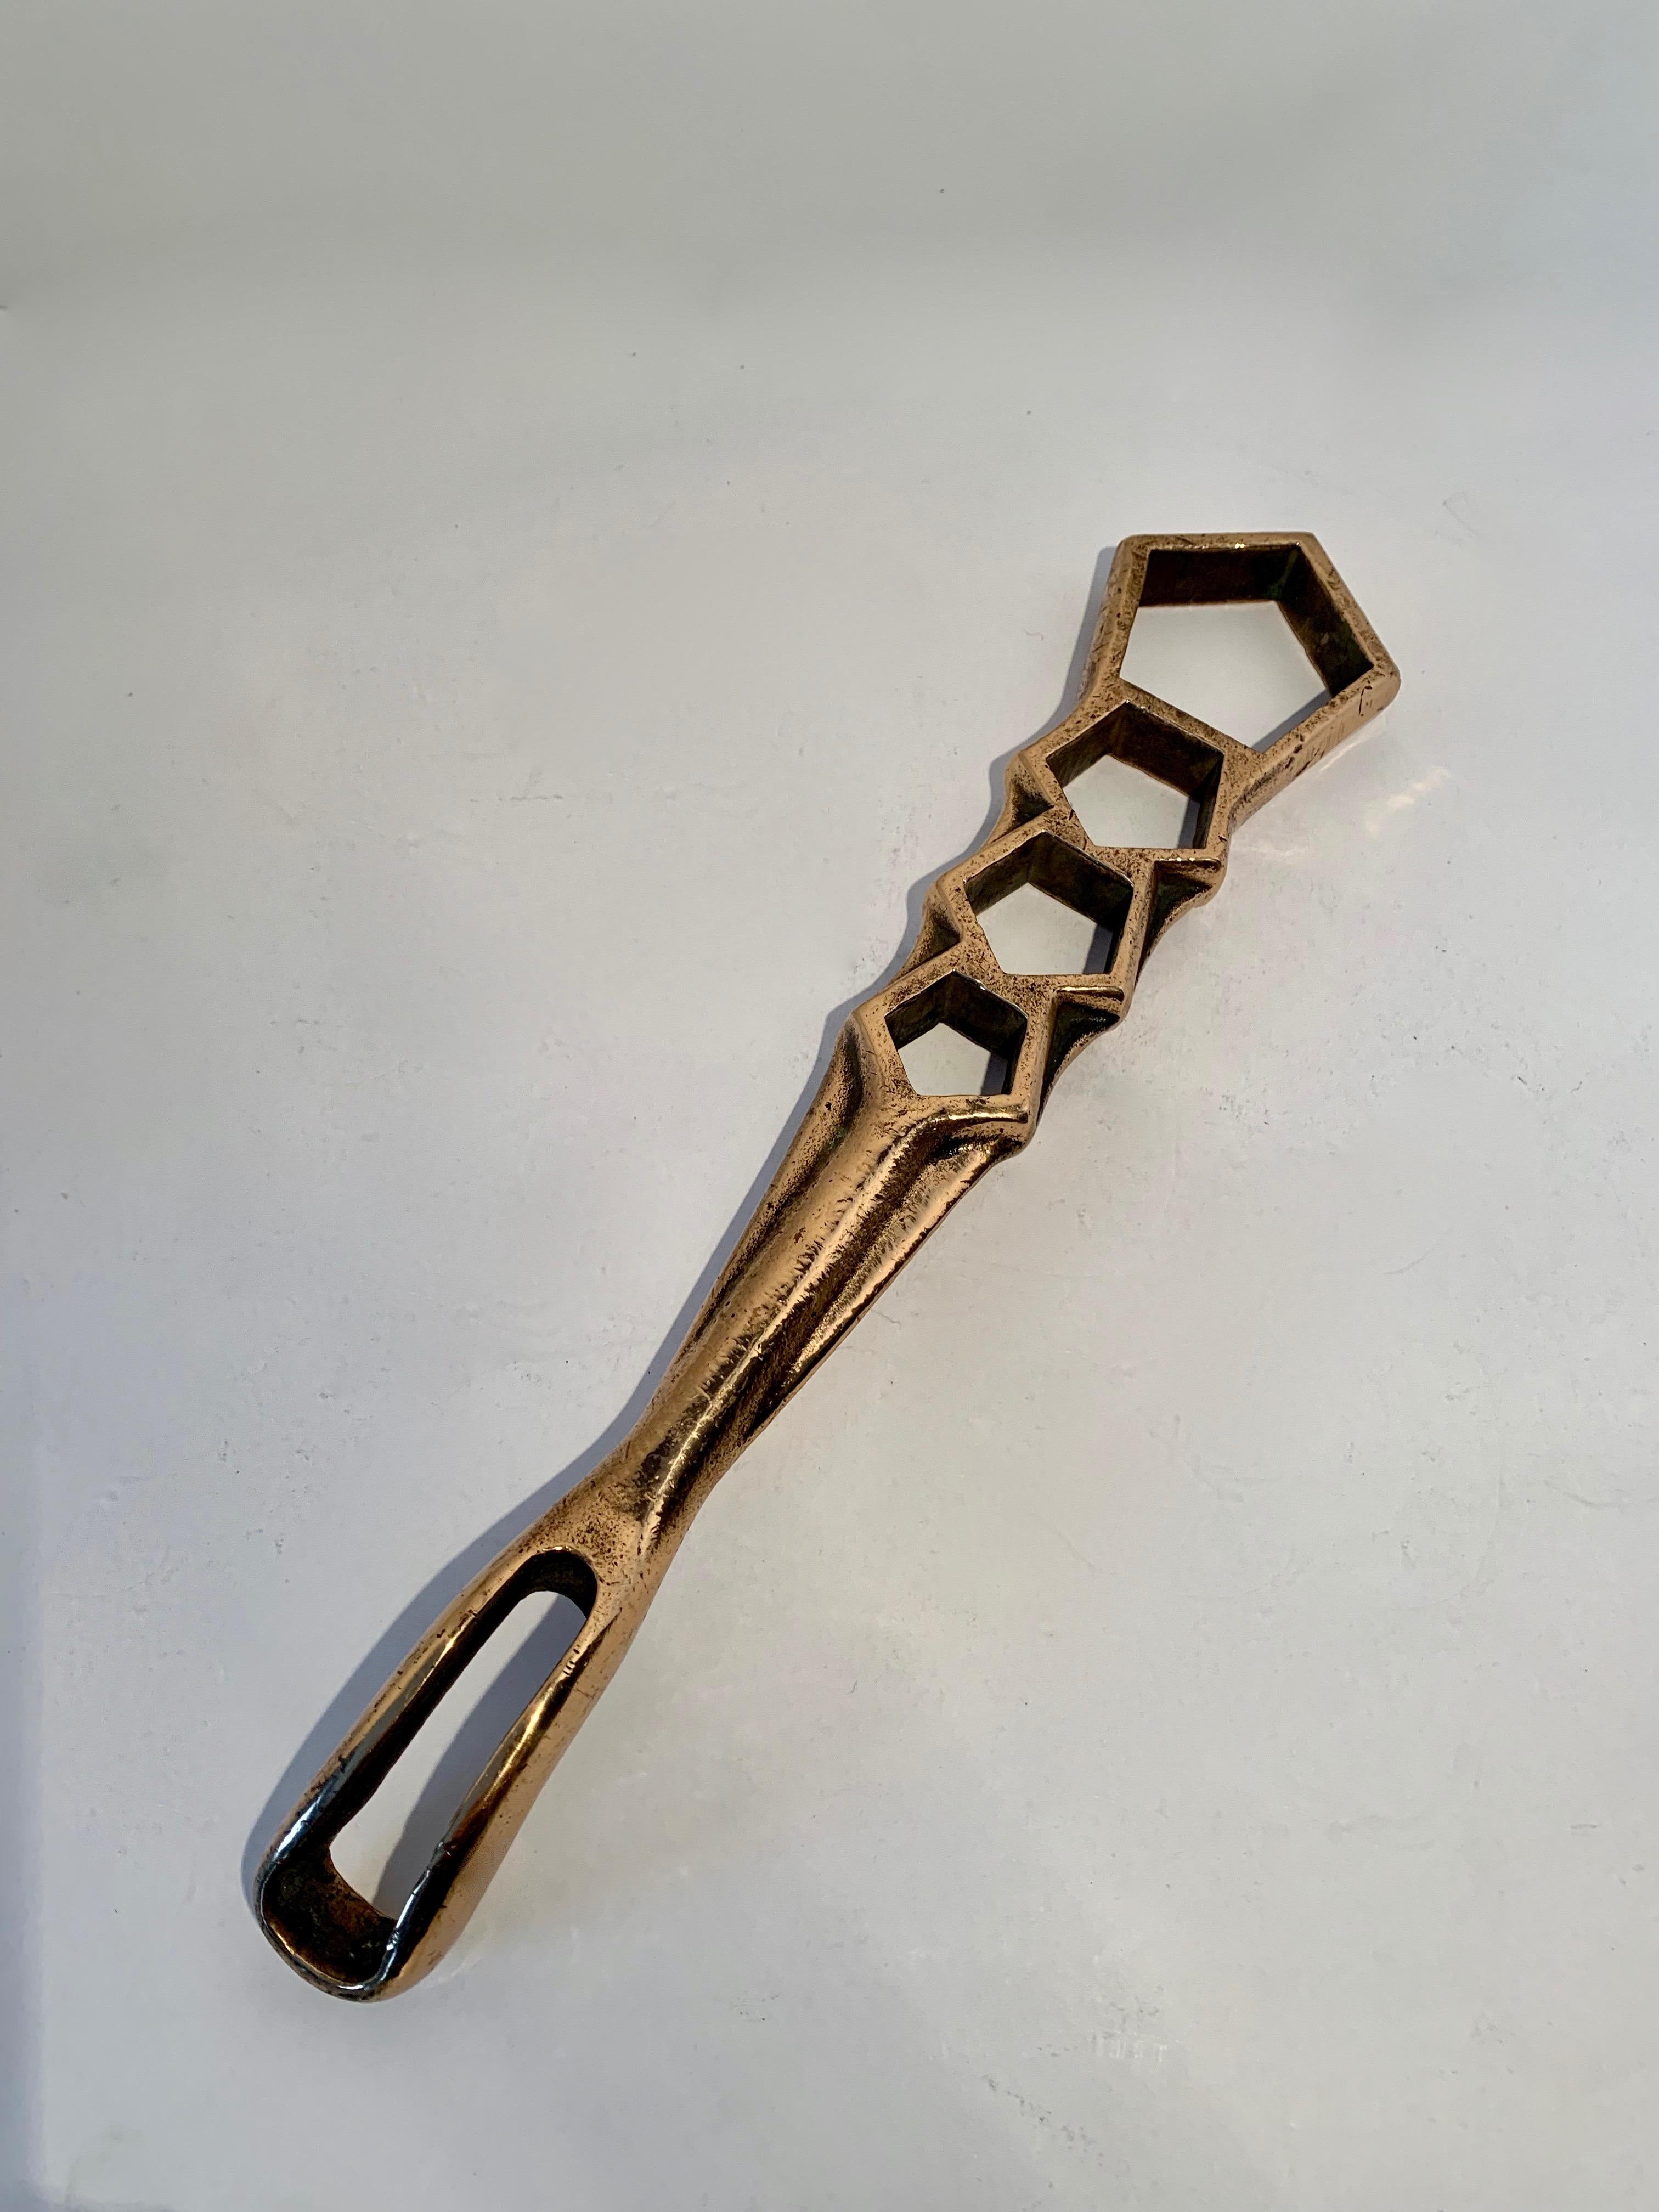 Vintage fire hydrant wrench, a solid bronze piece which can still be used as a wrench, however, due to the wonderful sheen and weight makes a great, well sized paper weight or decorative piece.